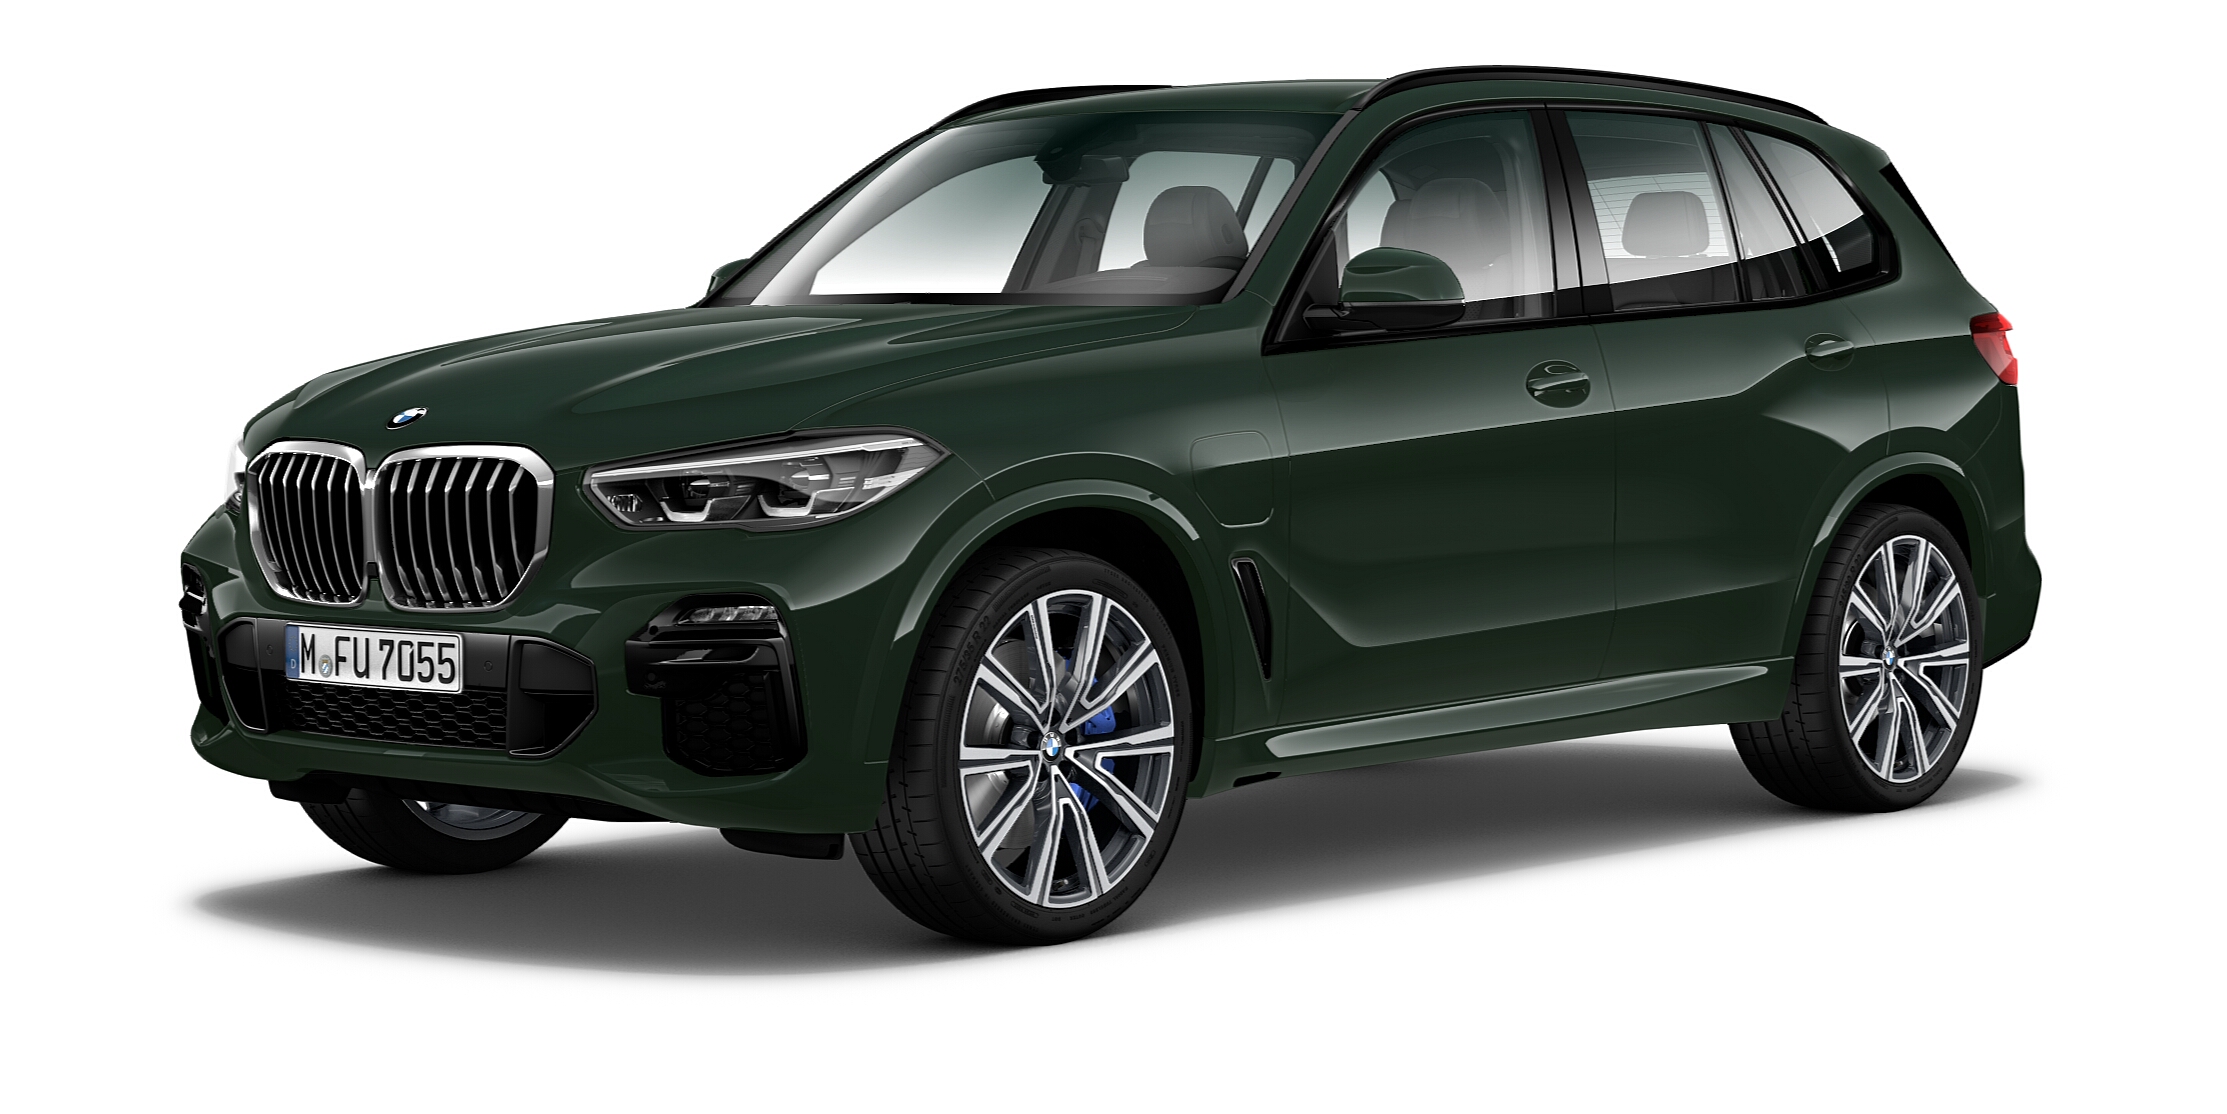 5 Series/M5 LCI and upper-end X models officially added to the BMW